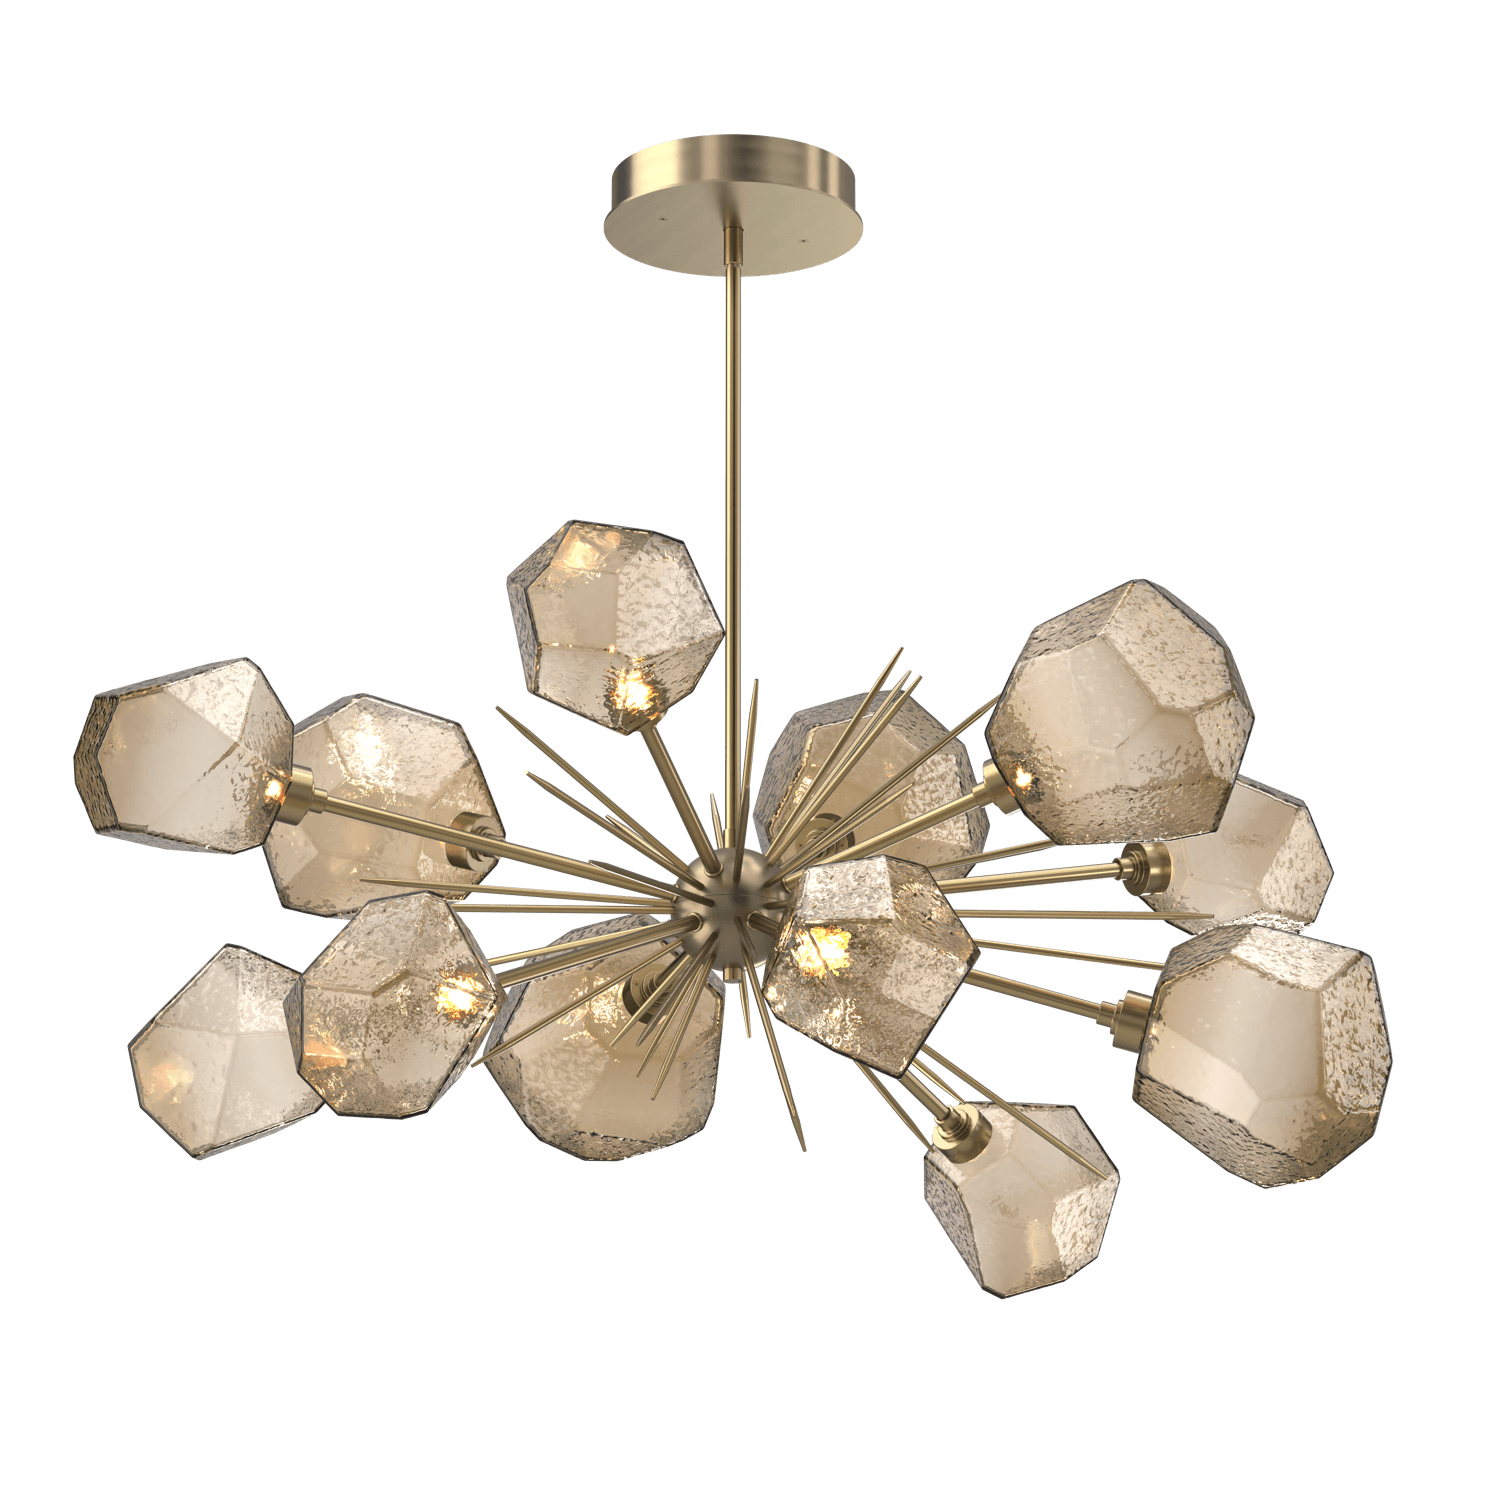 PLB0039-0D-HB-B-Hammerton-Studio-Gem-43-inch-oval-starburst-chandelier-with-heritage-brass-finish-and-bronze-blown-glass-shades-and-LED-lamping